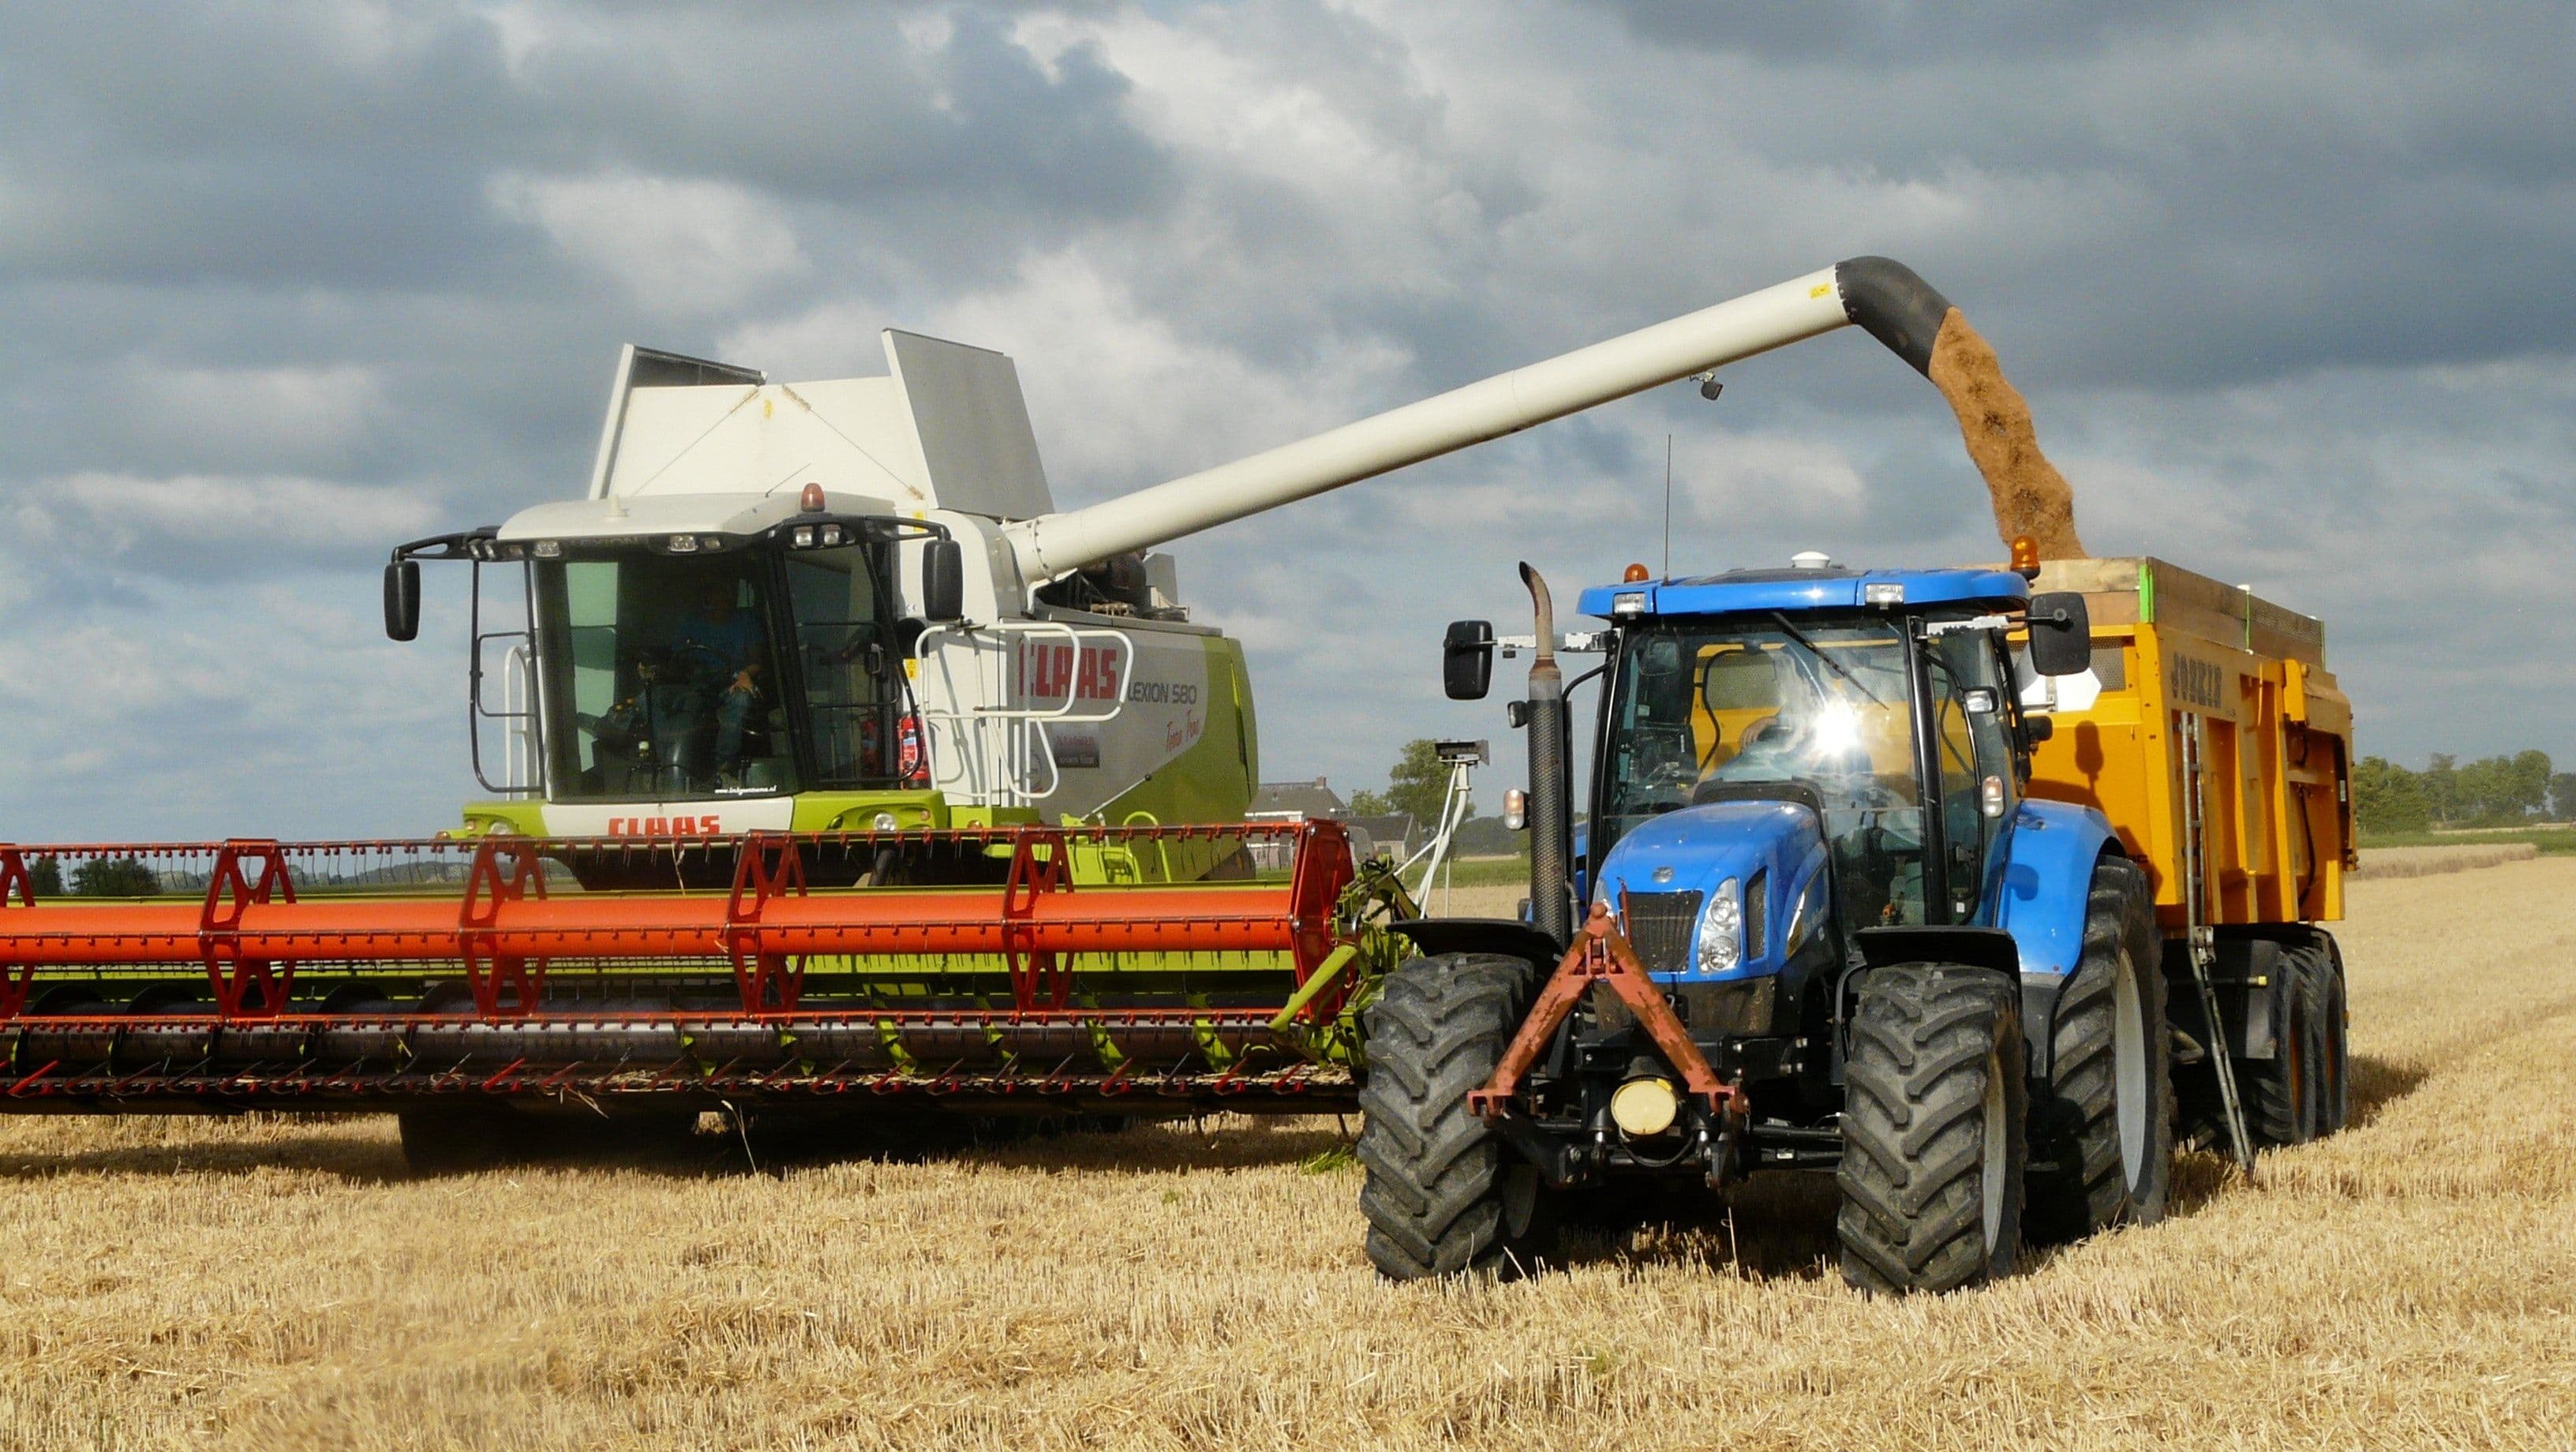 A tractor and a heavy farming vehicle